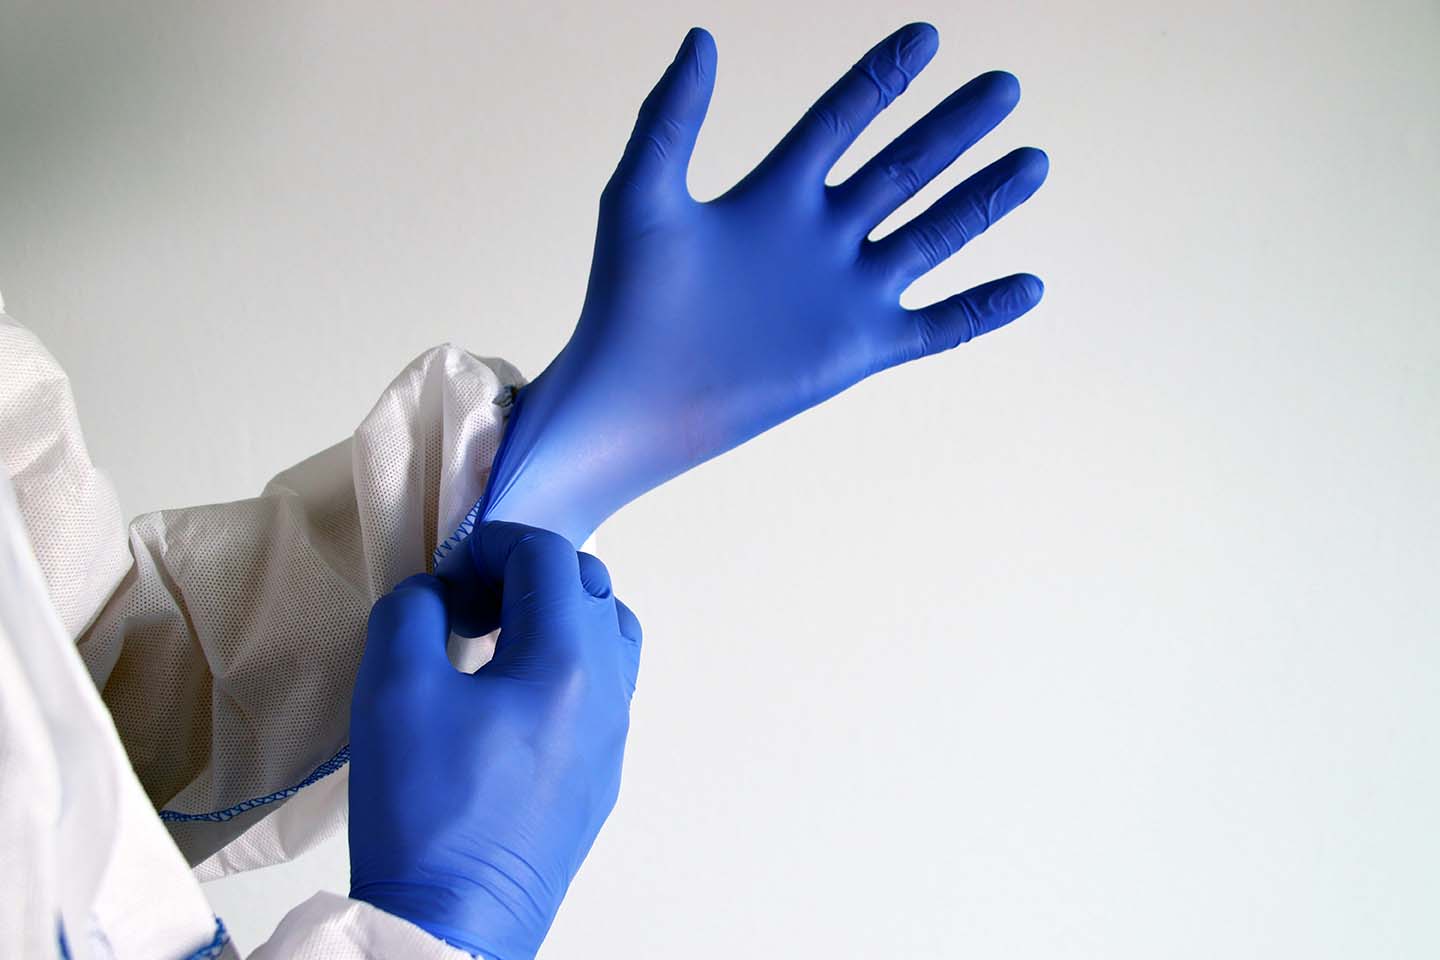 Two hands wearing a pair of nitrile surgical gloves, with a white lab coat covering the arms.